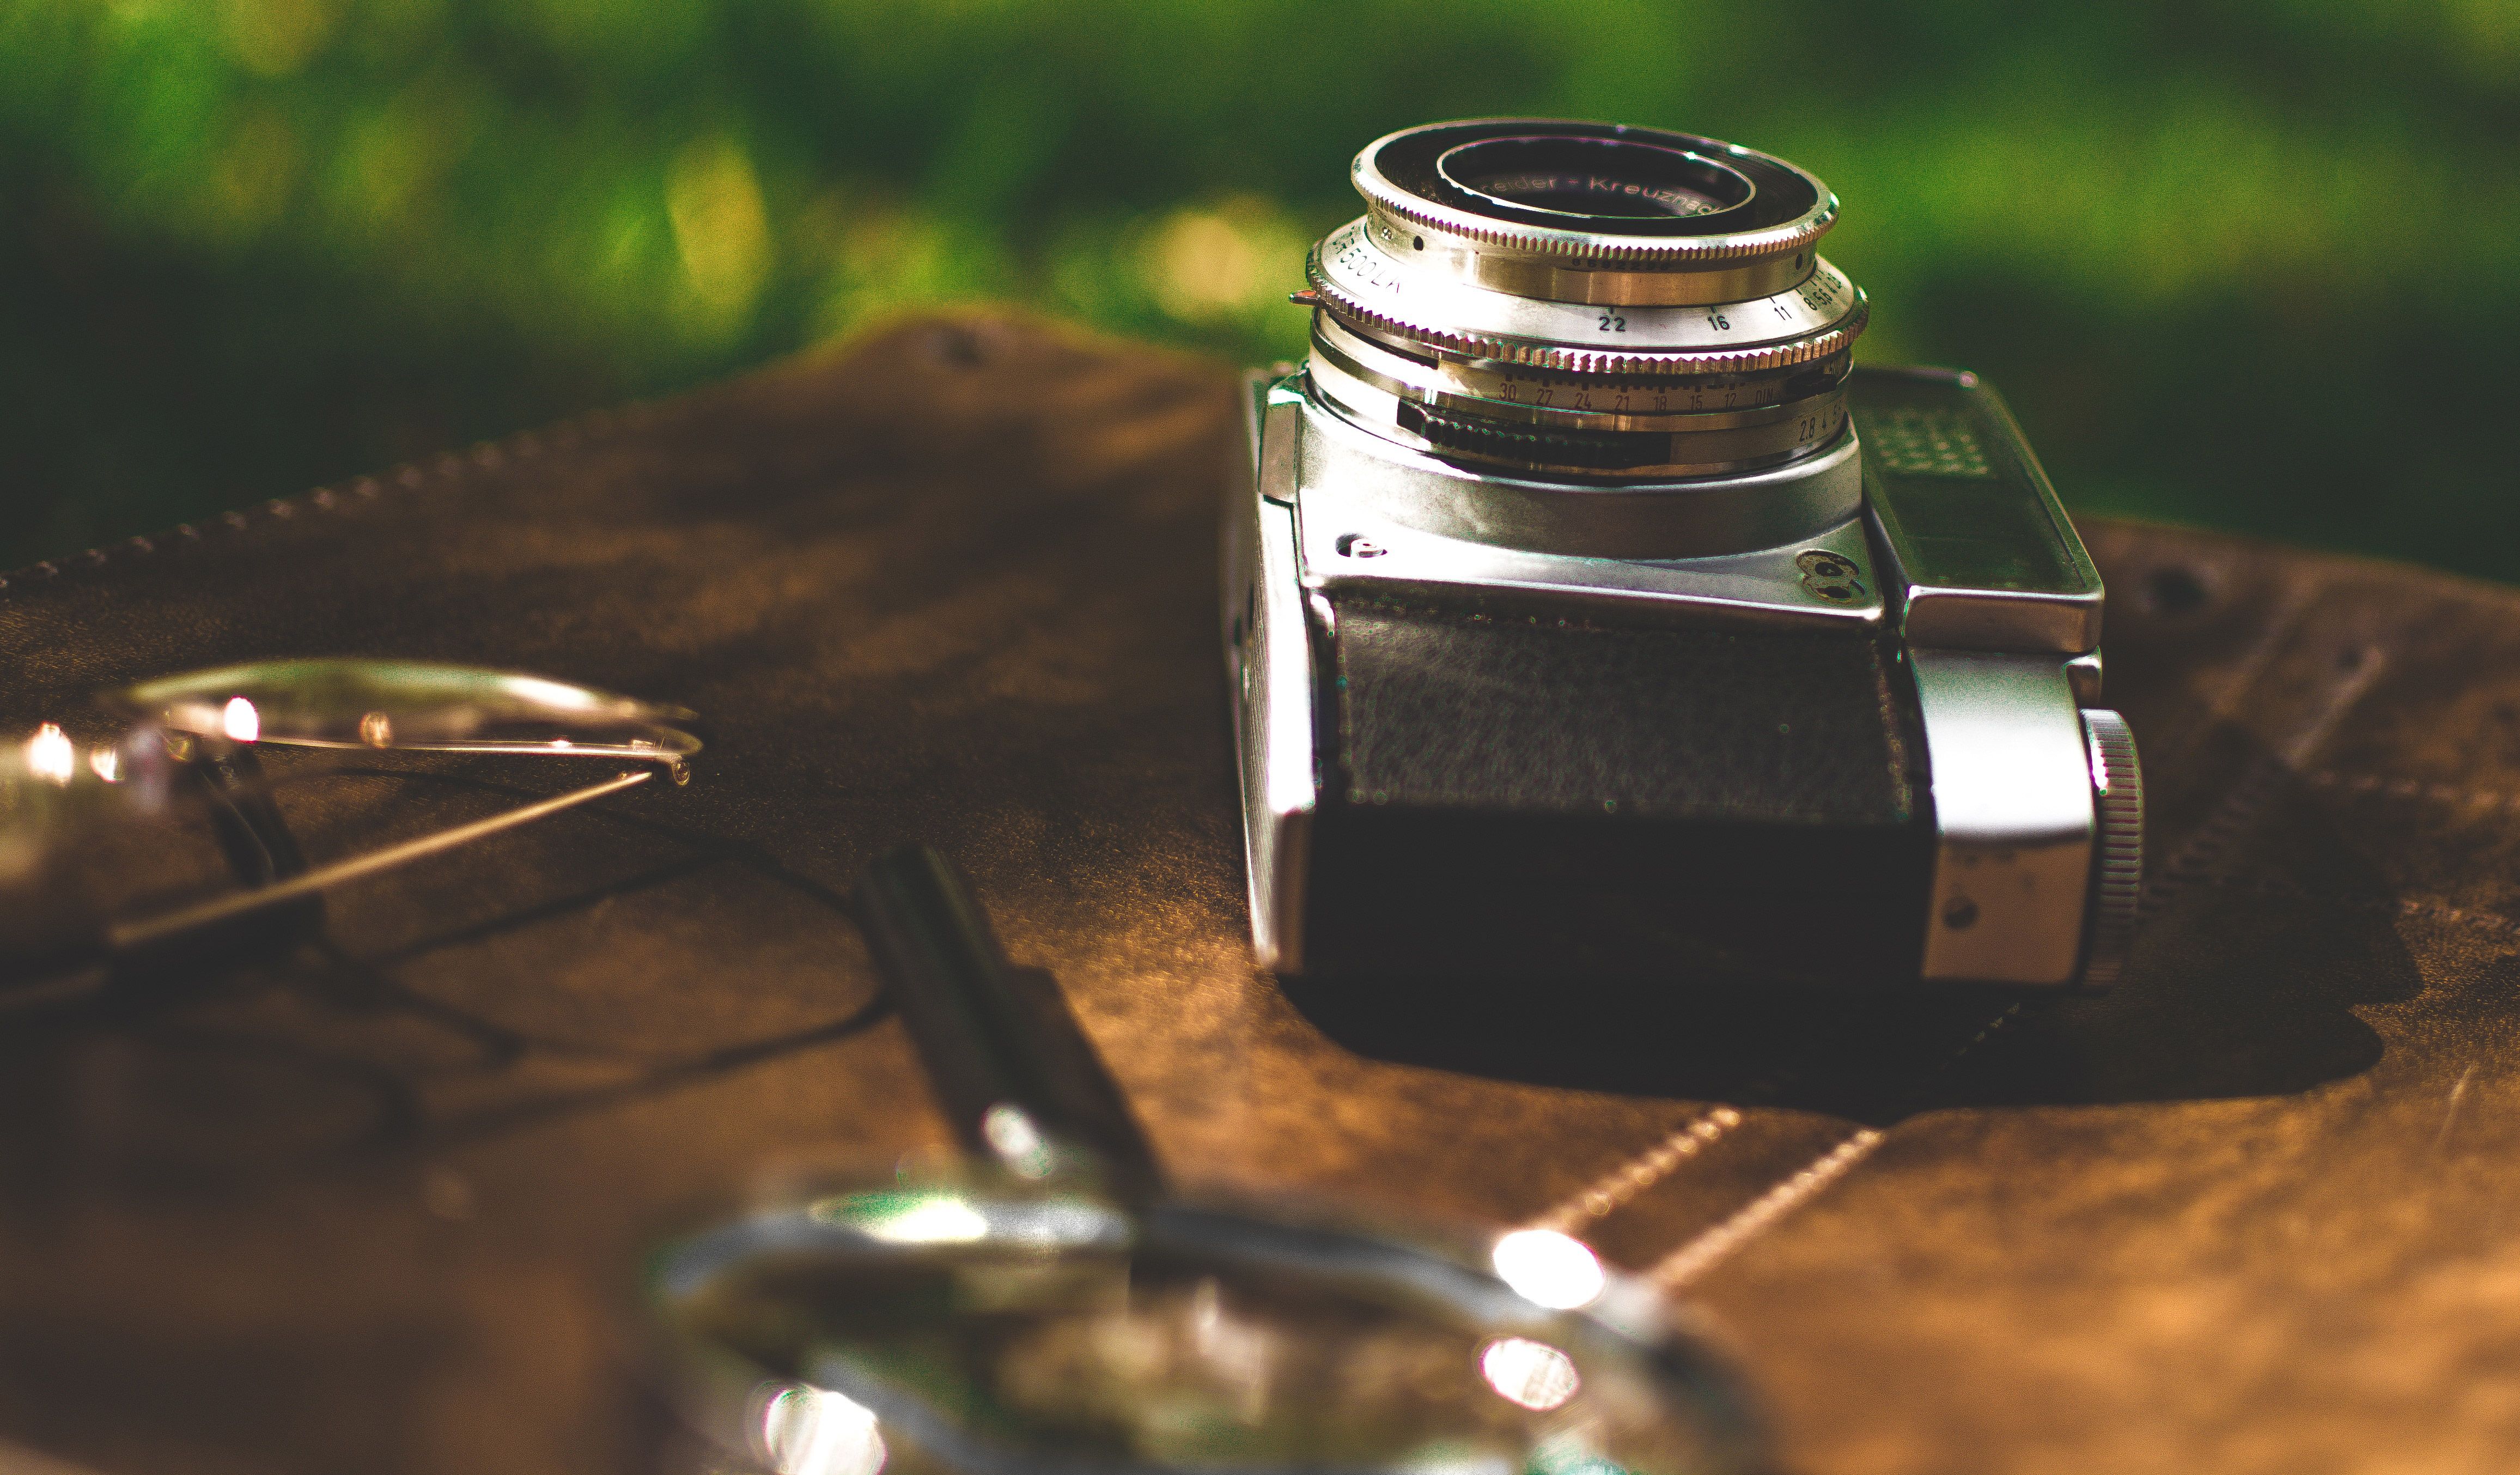 Retro Old Camera Magnifying Glass, HD Photography, 4k Wallpaper, Image, Background, Photo and Picture